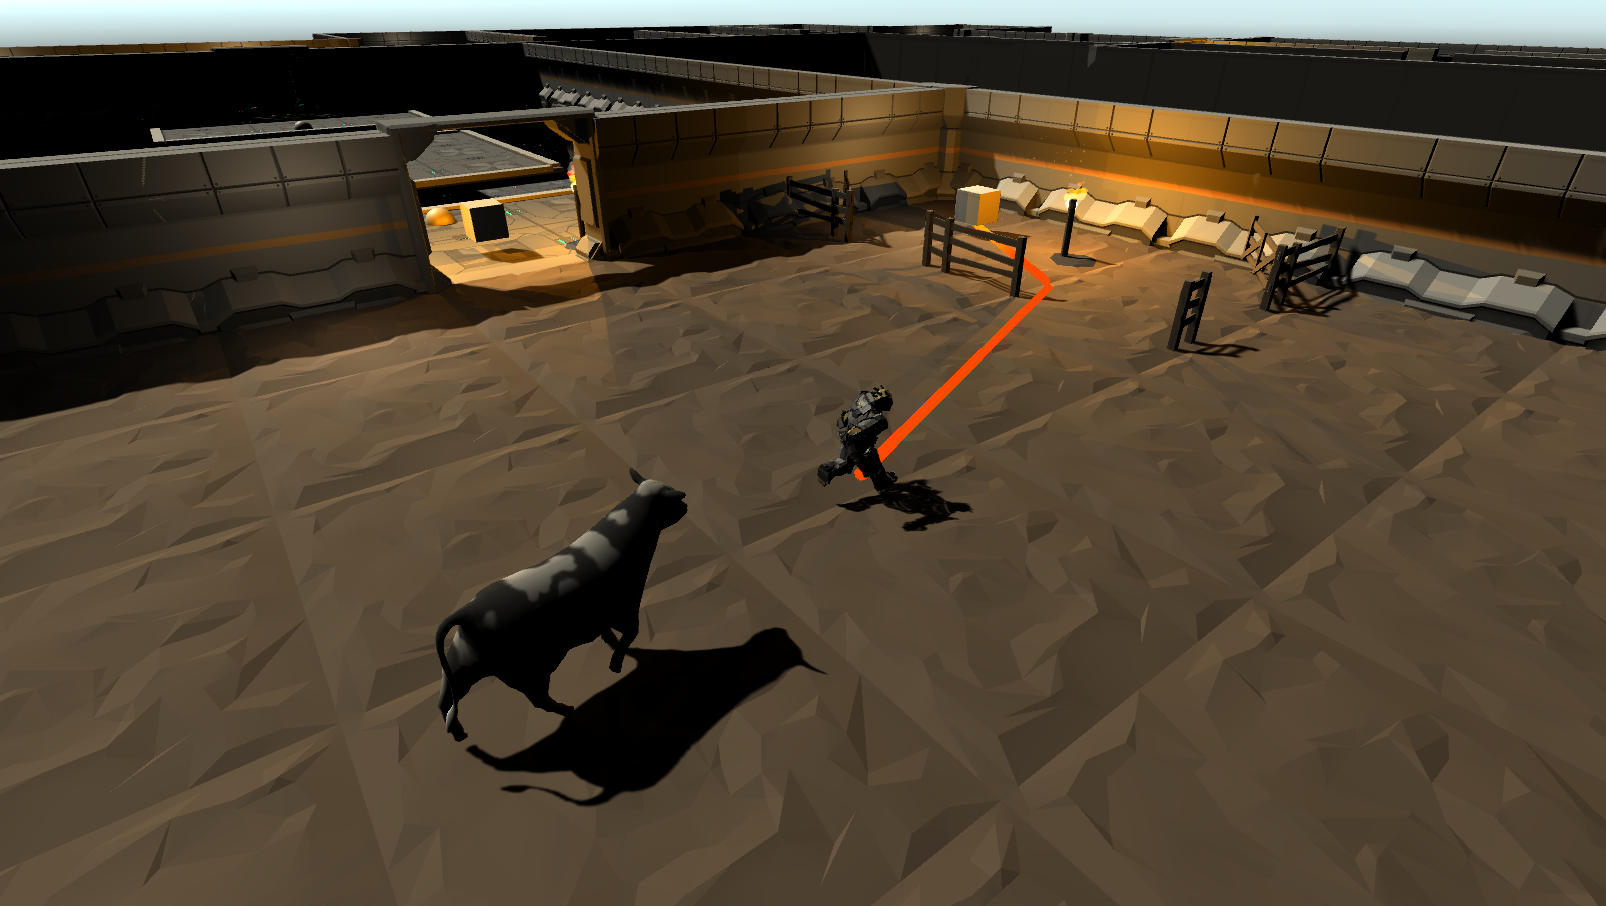 Three of the different accessibility features available during the user study of the Virtual Environment. The first navigational task demonstrates that the avatar has to reach an objective, a cube. On the fourth task, players have to overcome the fence that is blocking their path, with two torches identifying the objective's directions and the length of the door to the next room. And on the sixth task, they can request directions to the objective, which can be done visually by following an orange line.